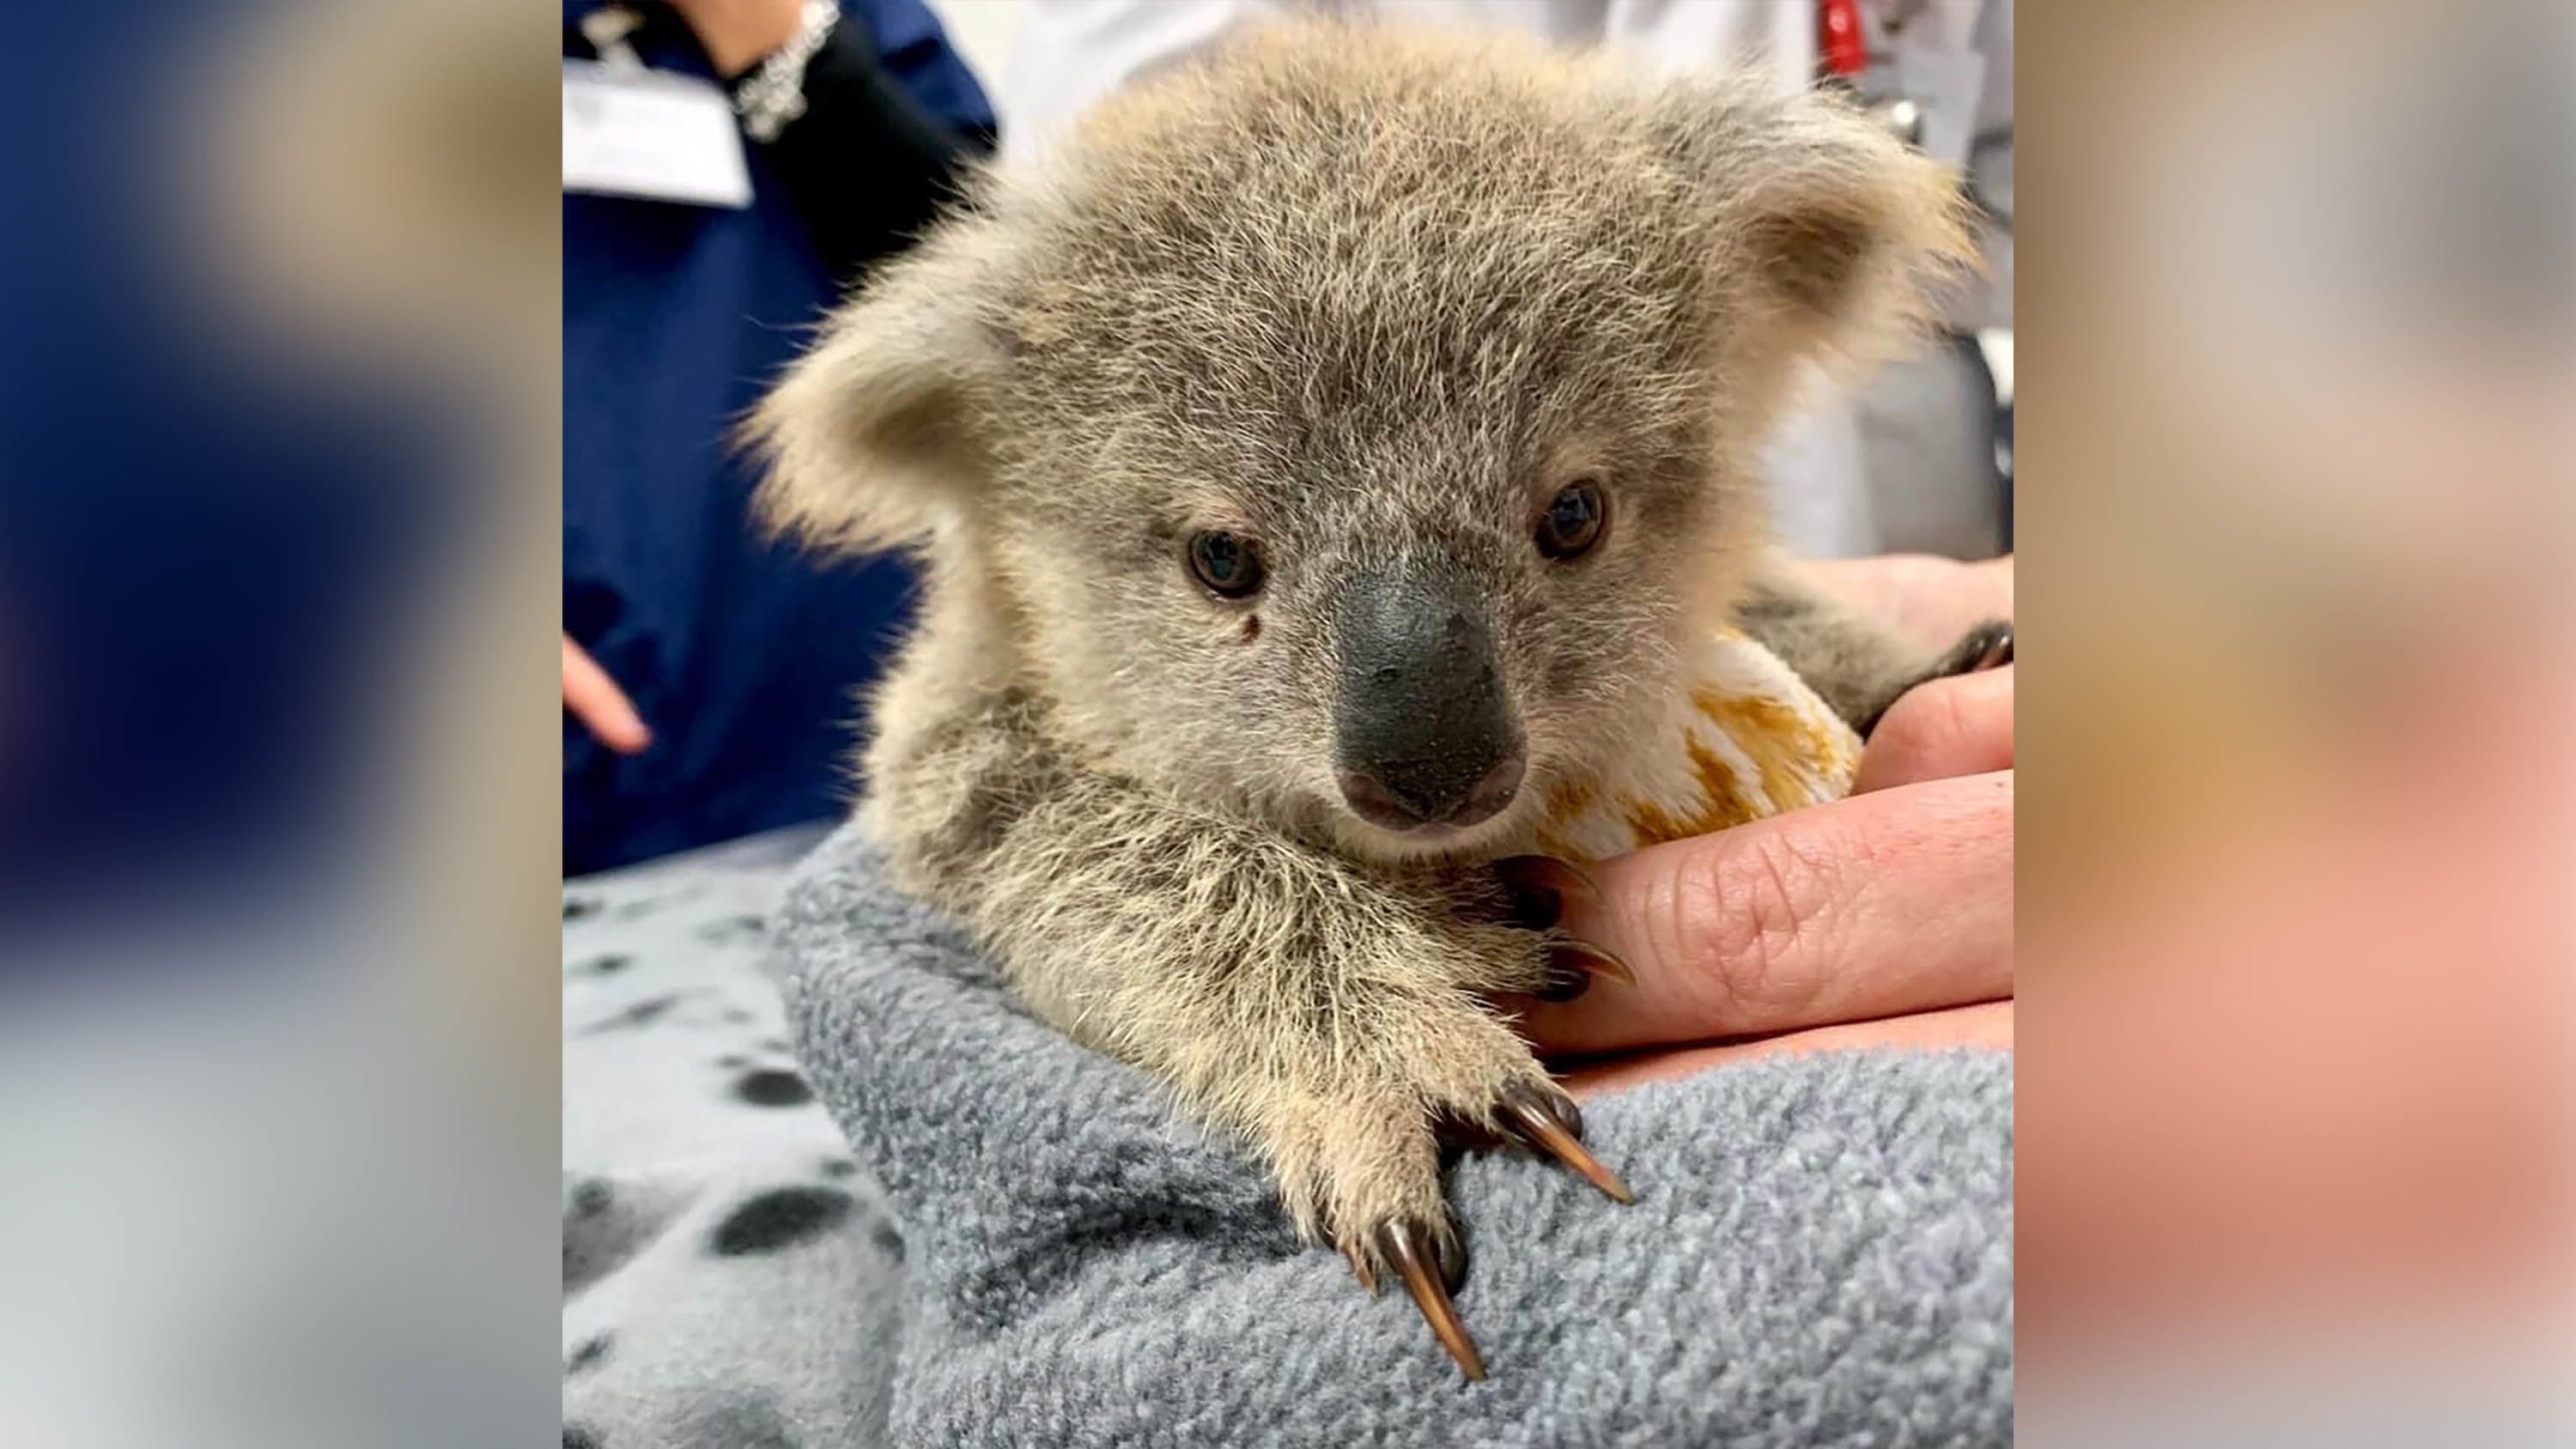 Volunteers around the world are sewing pouches for Australia's orphaned or  injured kangaroos, koalas and bats | CNN